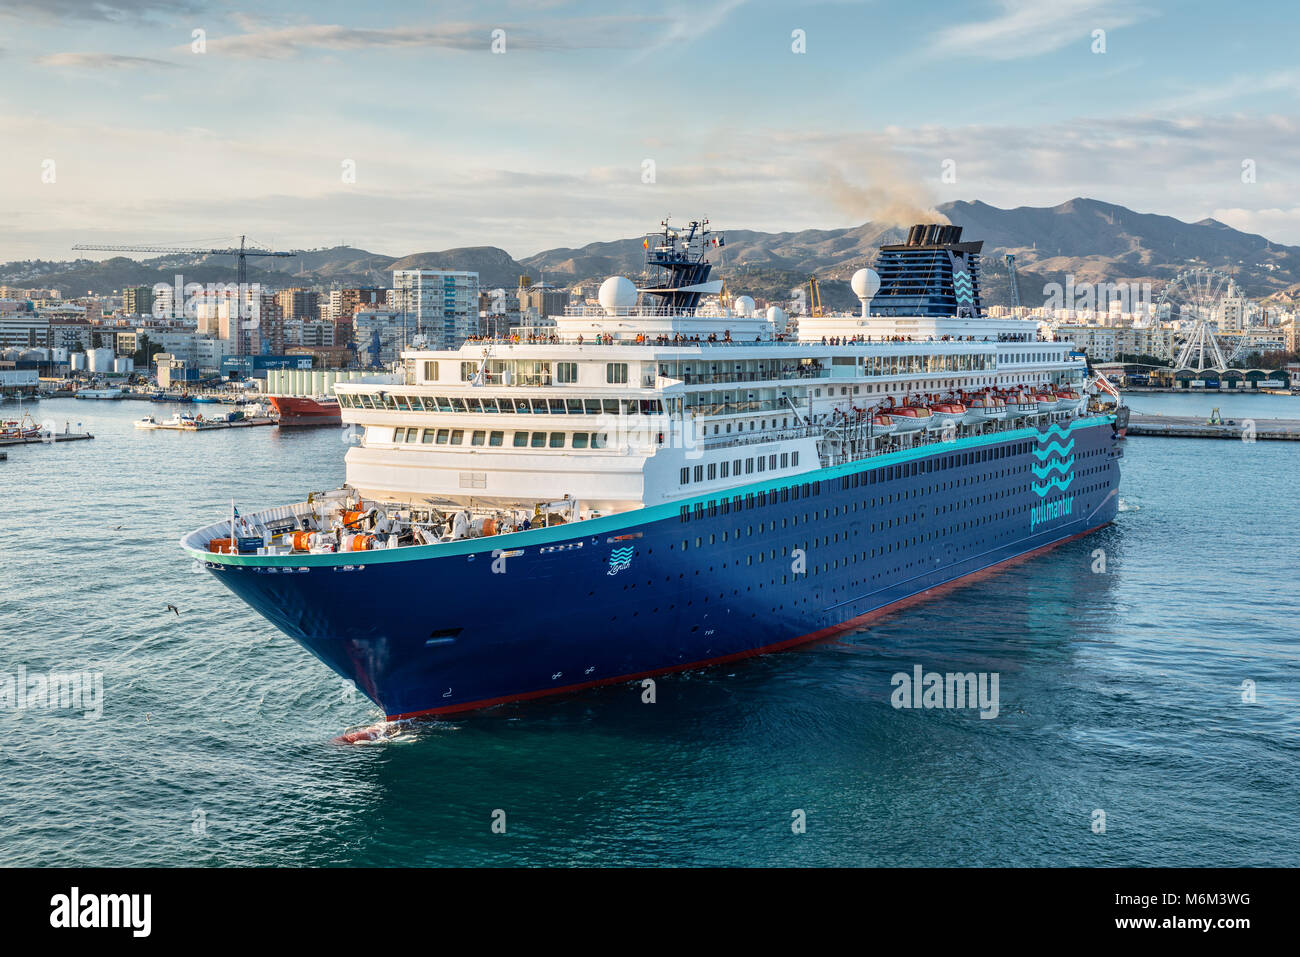 Malaga, Spain - December 7, 2016: The Pullmantur Zenith cruise ship leaves  the port of Malaga, Andalusia, Spain Stock Photo - Alamy